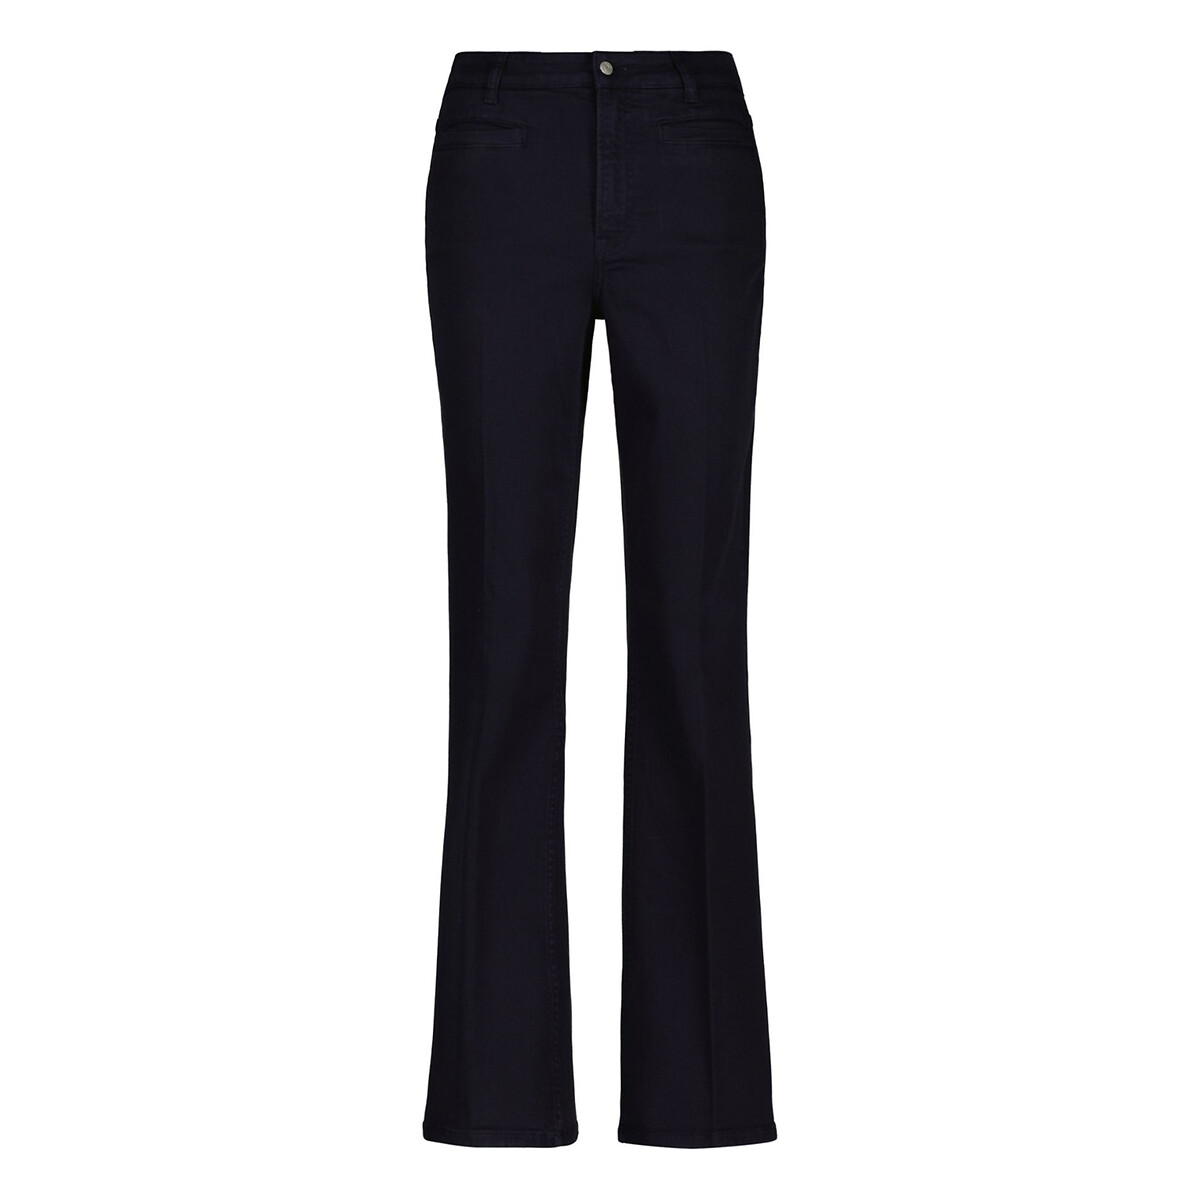 HUGO - Regular-fit bootcut trousers in stretch fabric